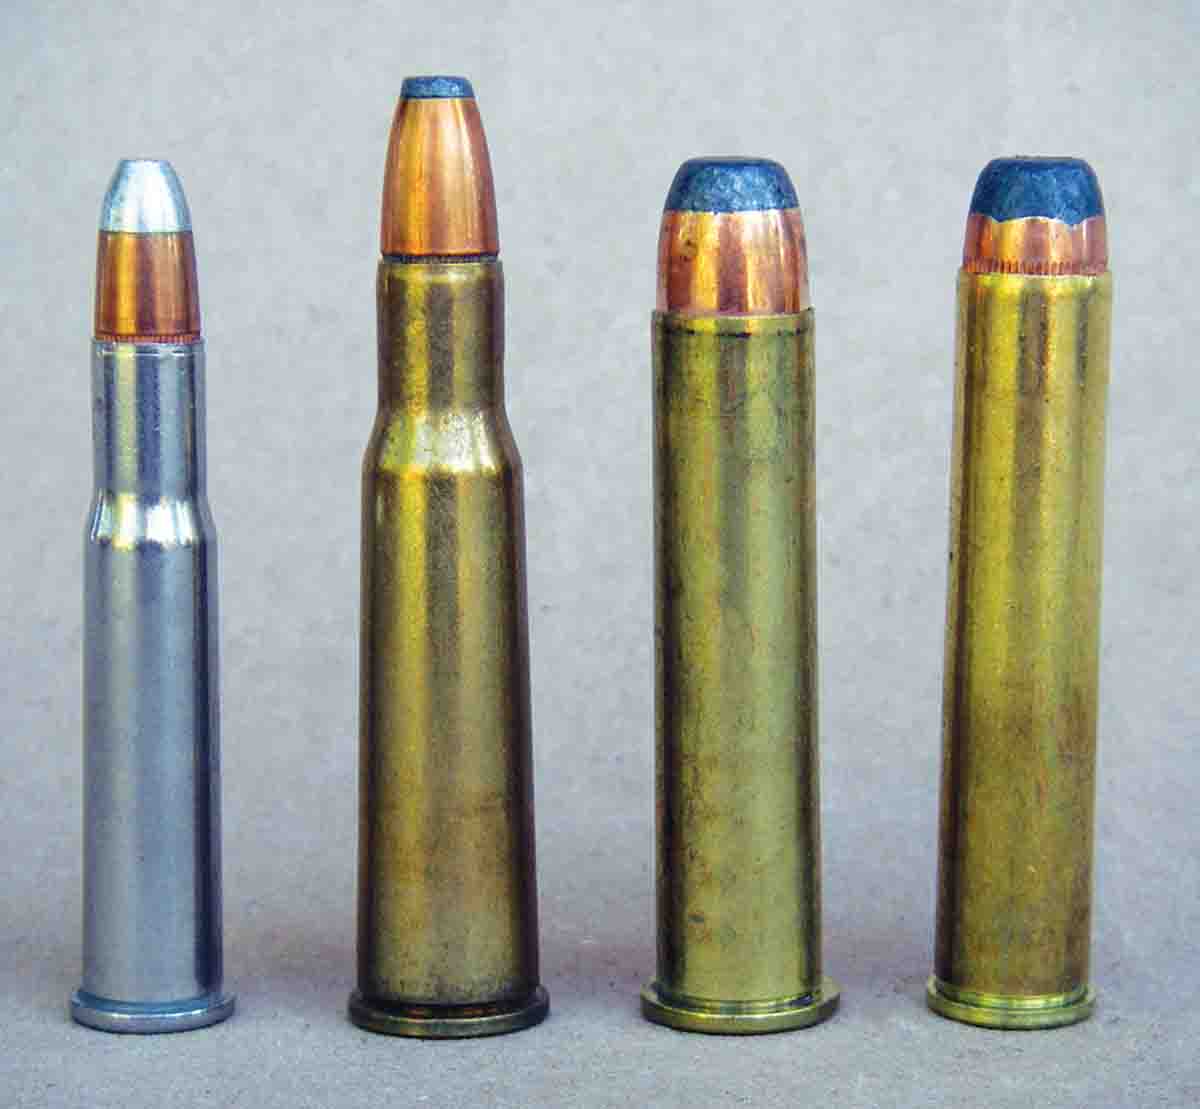 Levergun cartridges include (left to right): the .30-30 Winchester, .348 Winchester, .45-70 and the .444 Marlin.